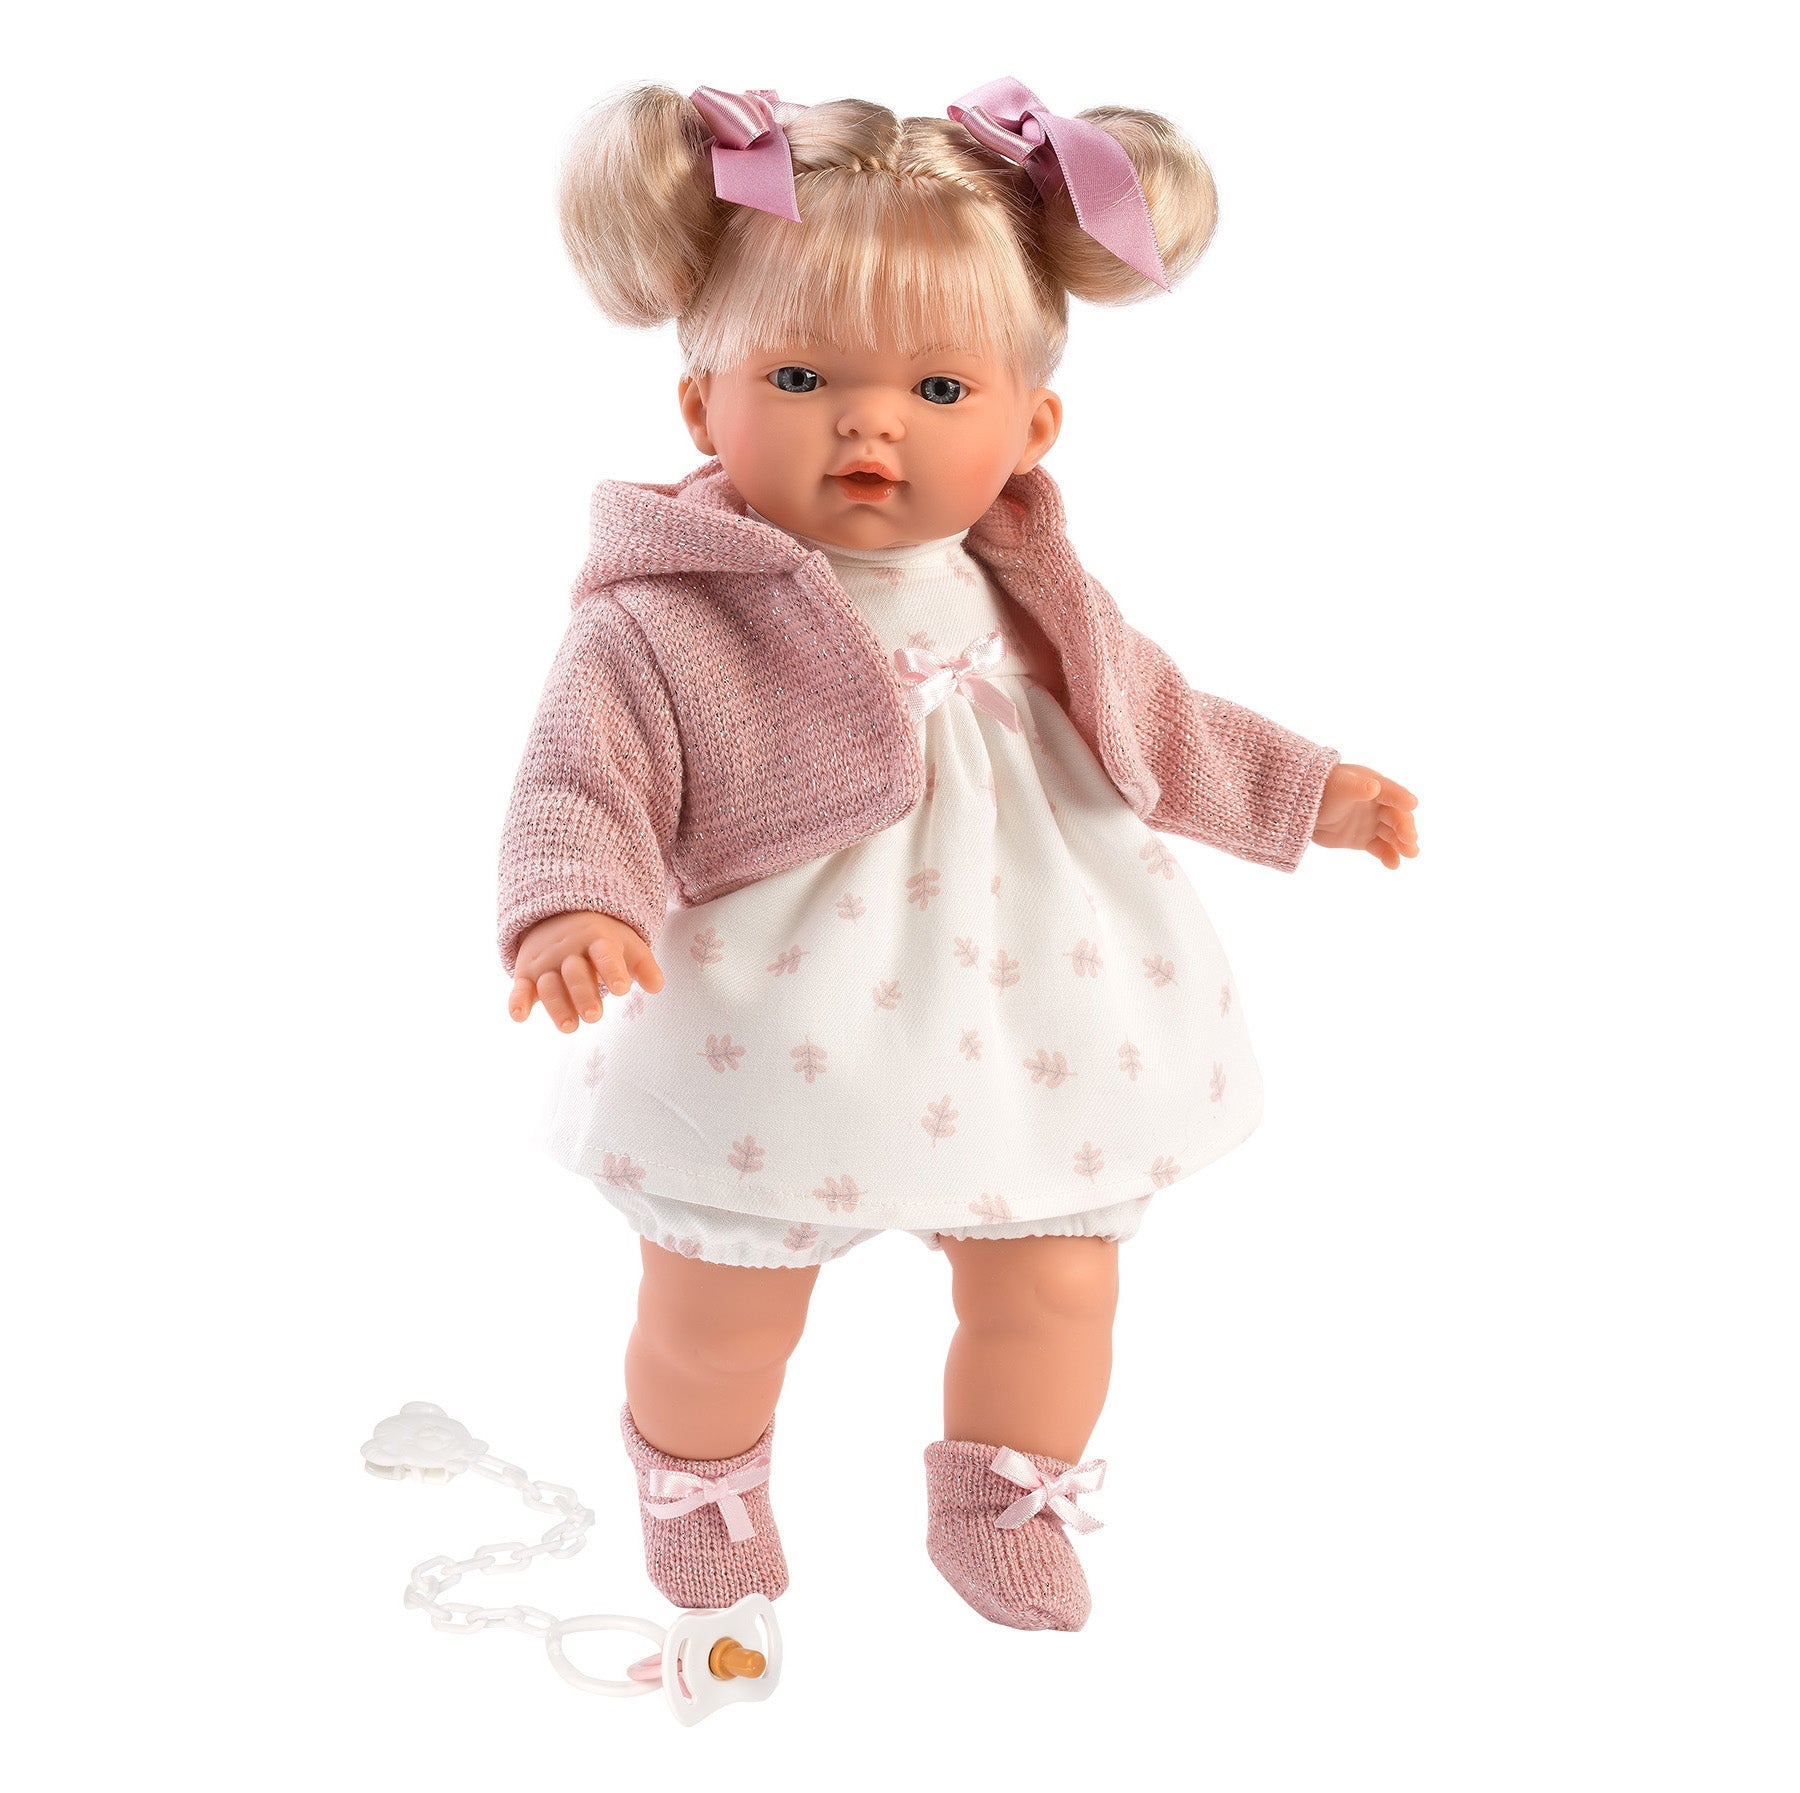 Llorens 13" Soft Body Crying Baby Doll Kaitlin Dolls